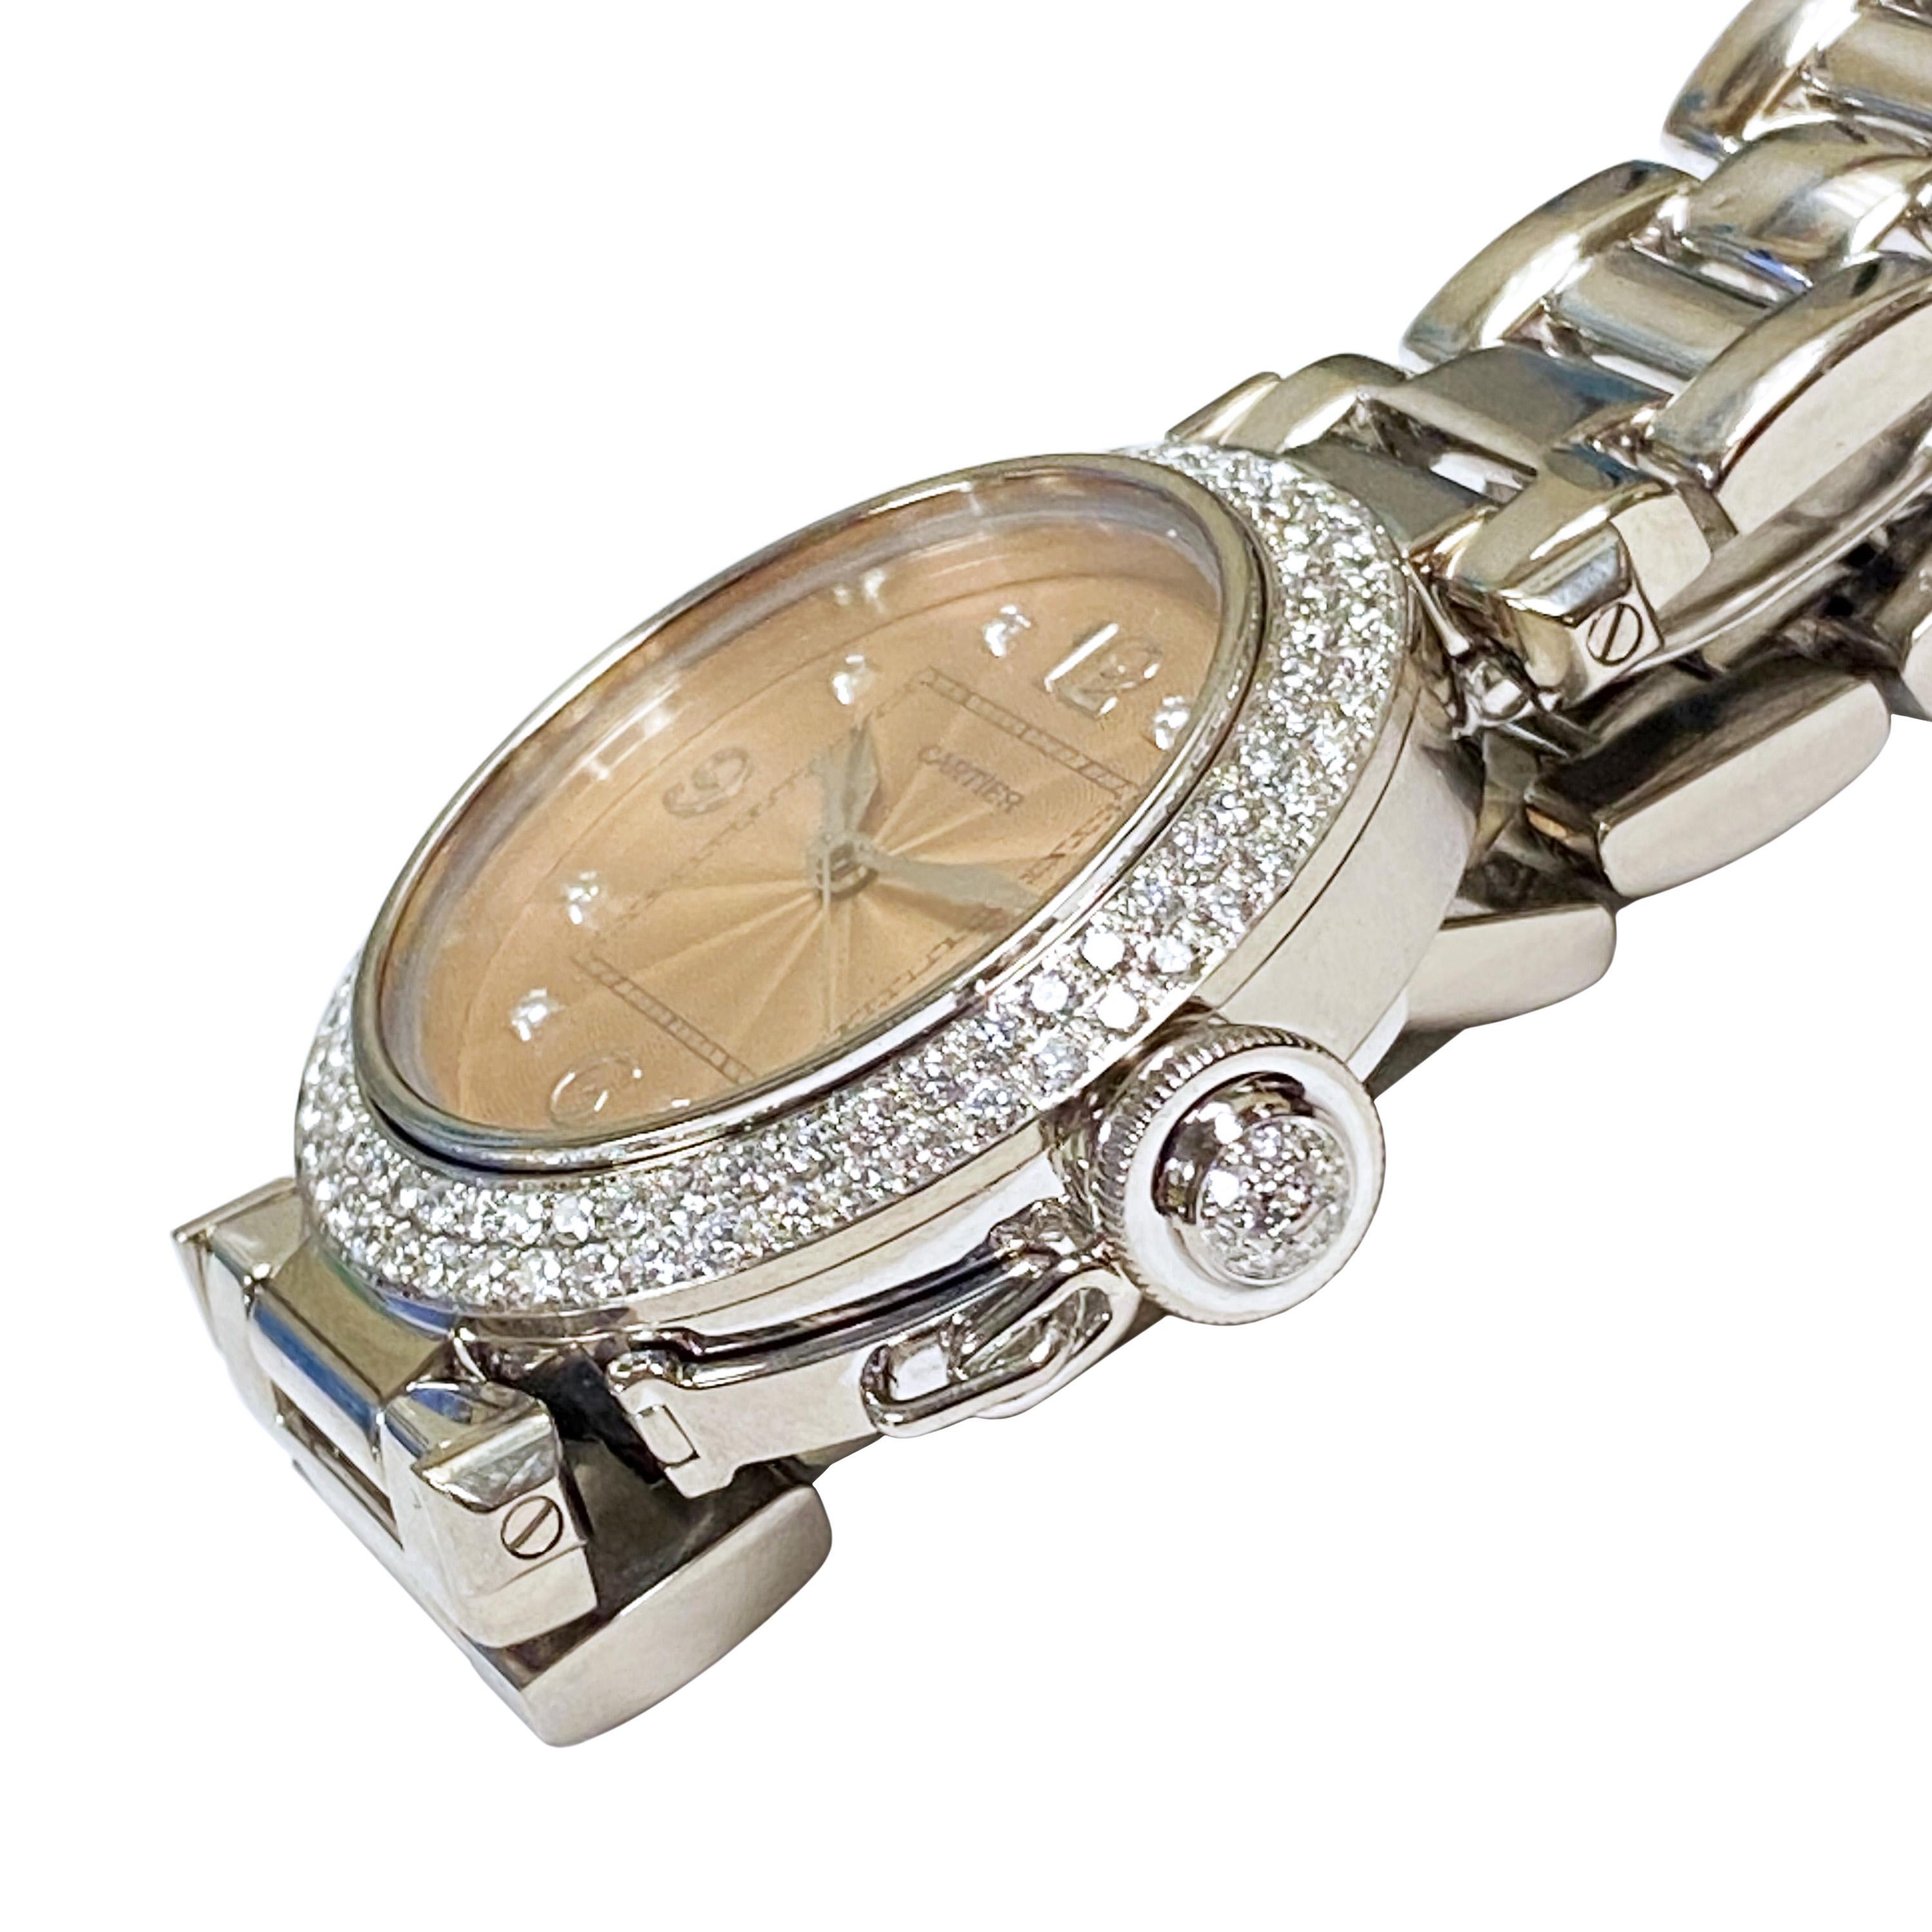 Circa 2005 Cartier Pasha 18K White Gold Wrist Watch,  35 M.M. 3 piece Water resistant case with Cartier Factory Diamond set Double row bezel totaling 2.75 Carat, Diamond set lock down crown.  Automatic, self winding movement, Engine turned Pink dial